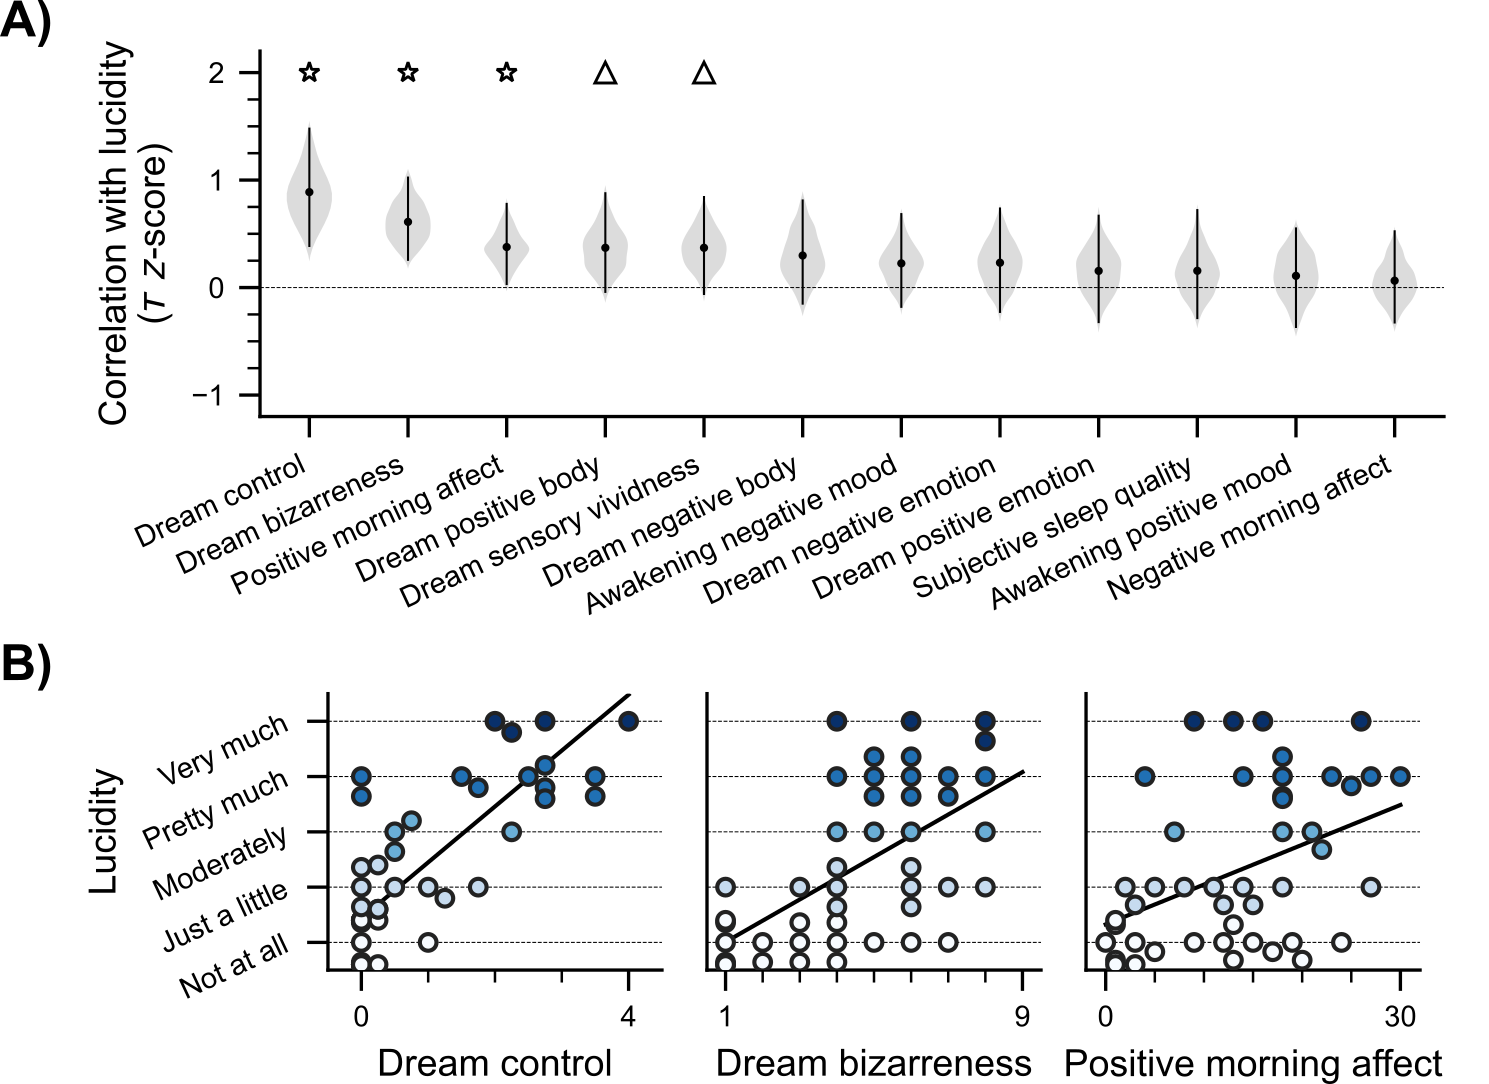 Figure 4: Lucidity level correlates. A) Dream control and dream bizarreness were the strongest dream characteristic predictors of lucidity level. Positive, but not negative, morning affect increased along with lucidity. Violin shadings represent the full distribution of resampled z values, with error bars highlighting the 95% confidence intervals. Stars indicate p < .05, triangles indicate p < .10. B) The strongest relationships with lucidity plotted with full dataset. Note that slight variation around each lucidity level (y-axis gridlines) is to show all data points and does not represent variation in values, and participants might contribute multiple datapoints to each plot. Slope lines are averaged across all resampled correlations.